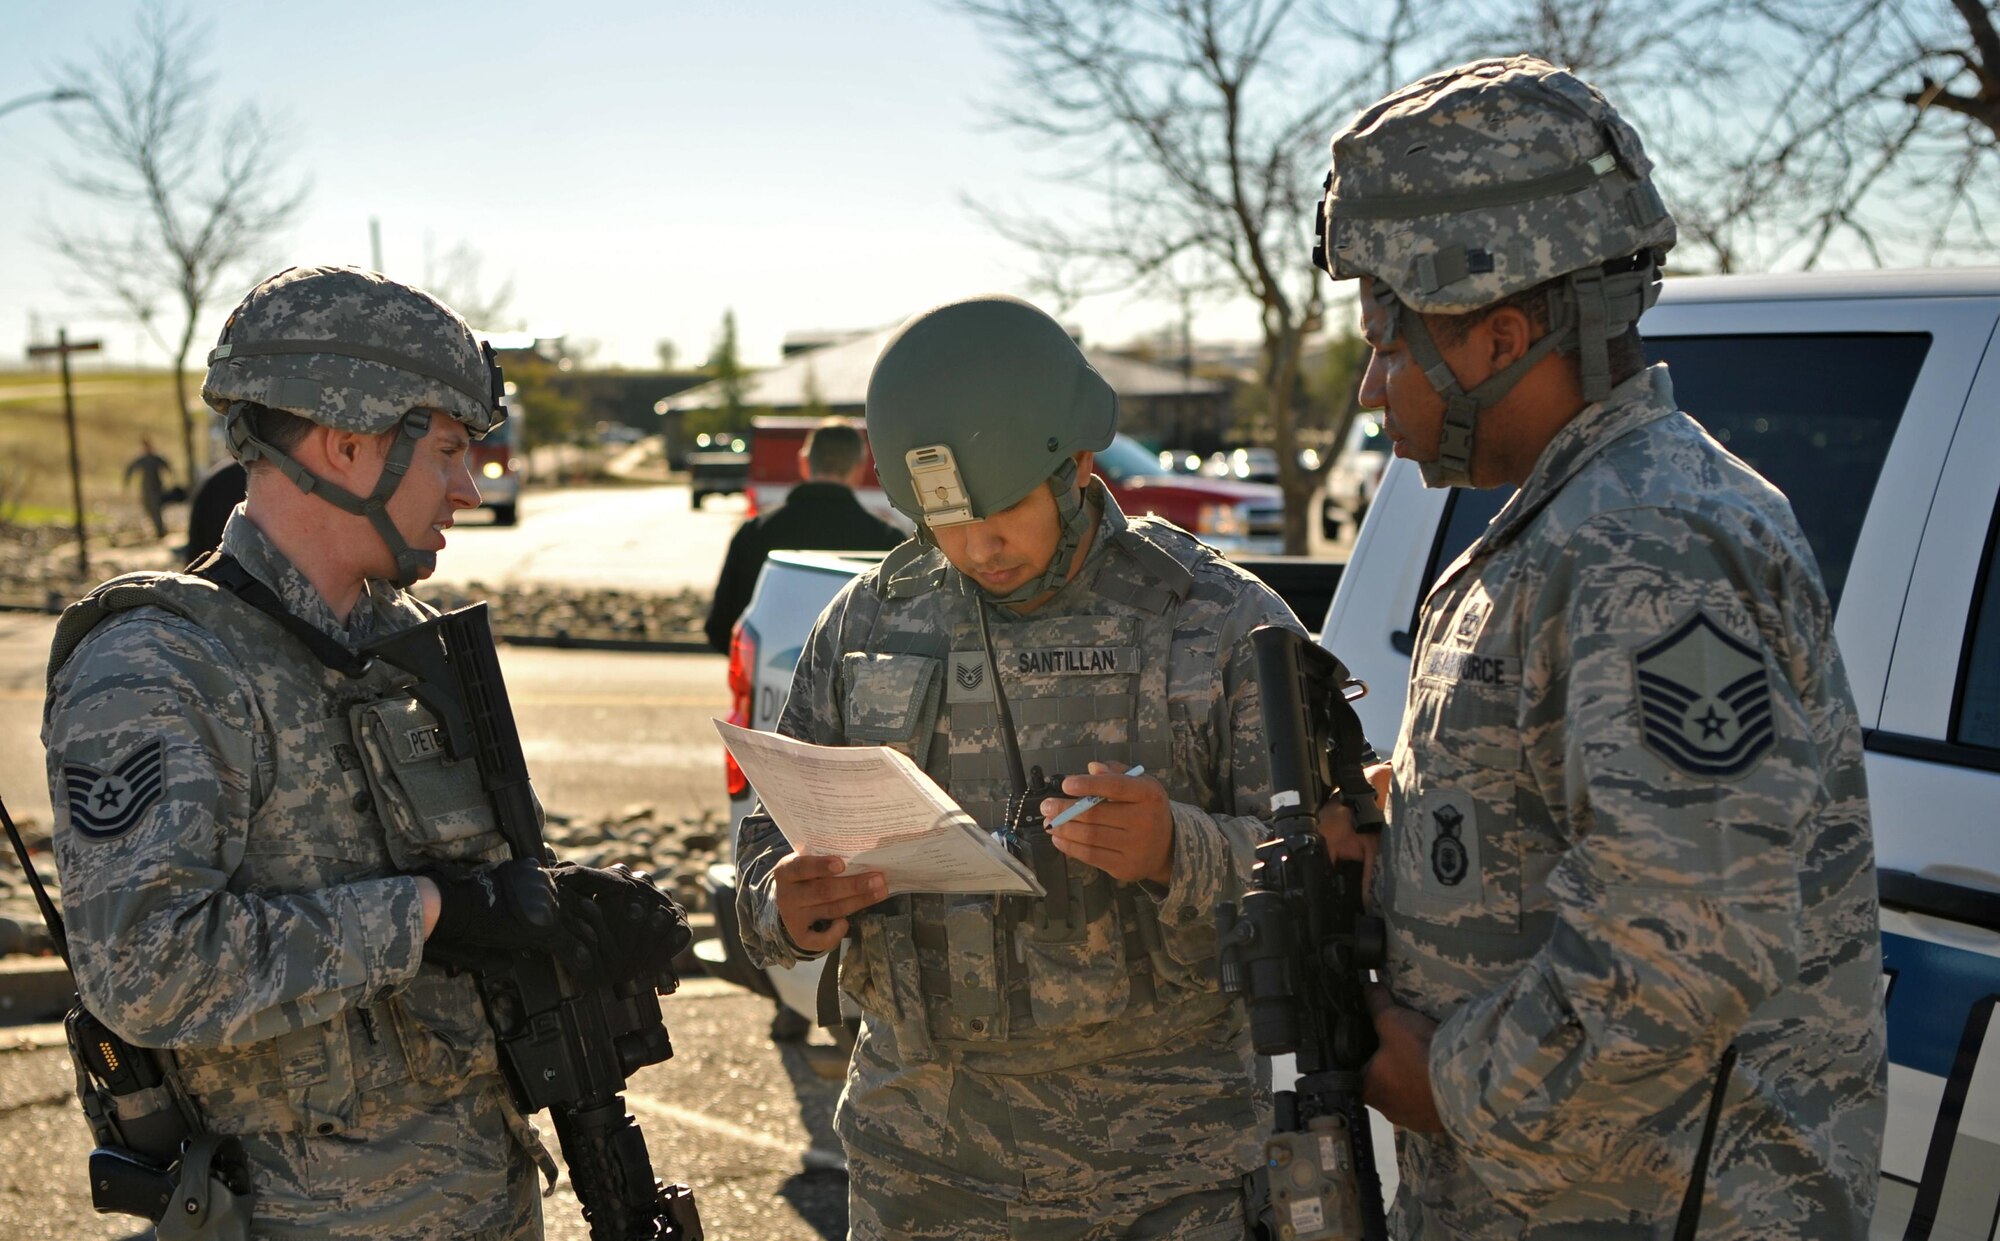 First responders plan the apprehension of the suspect and the recovery of the injured during an active shooter exercise Jan. 13, 2017 at Beale Air Force Base, California. Exercises help prepare Airmen for real world scenarios. (U.S. Air Force photo/Airman Tristan D. Viglianco)